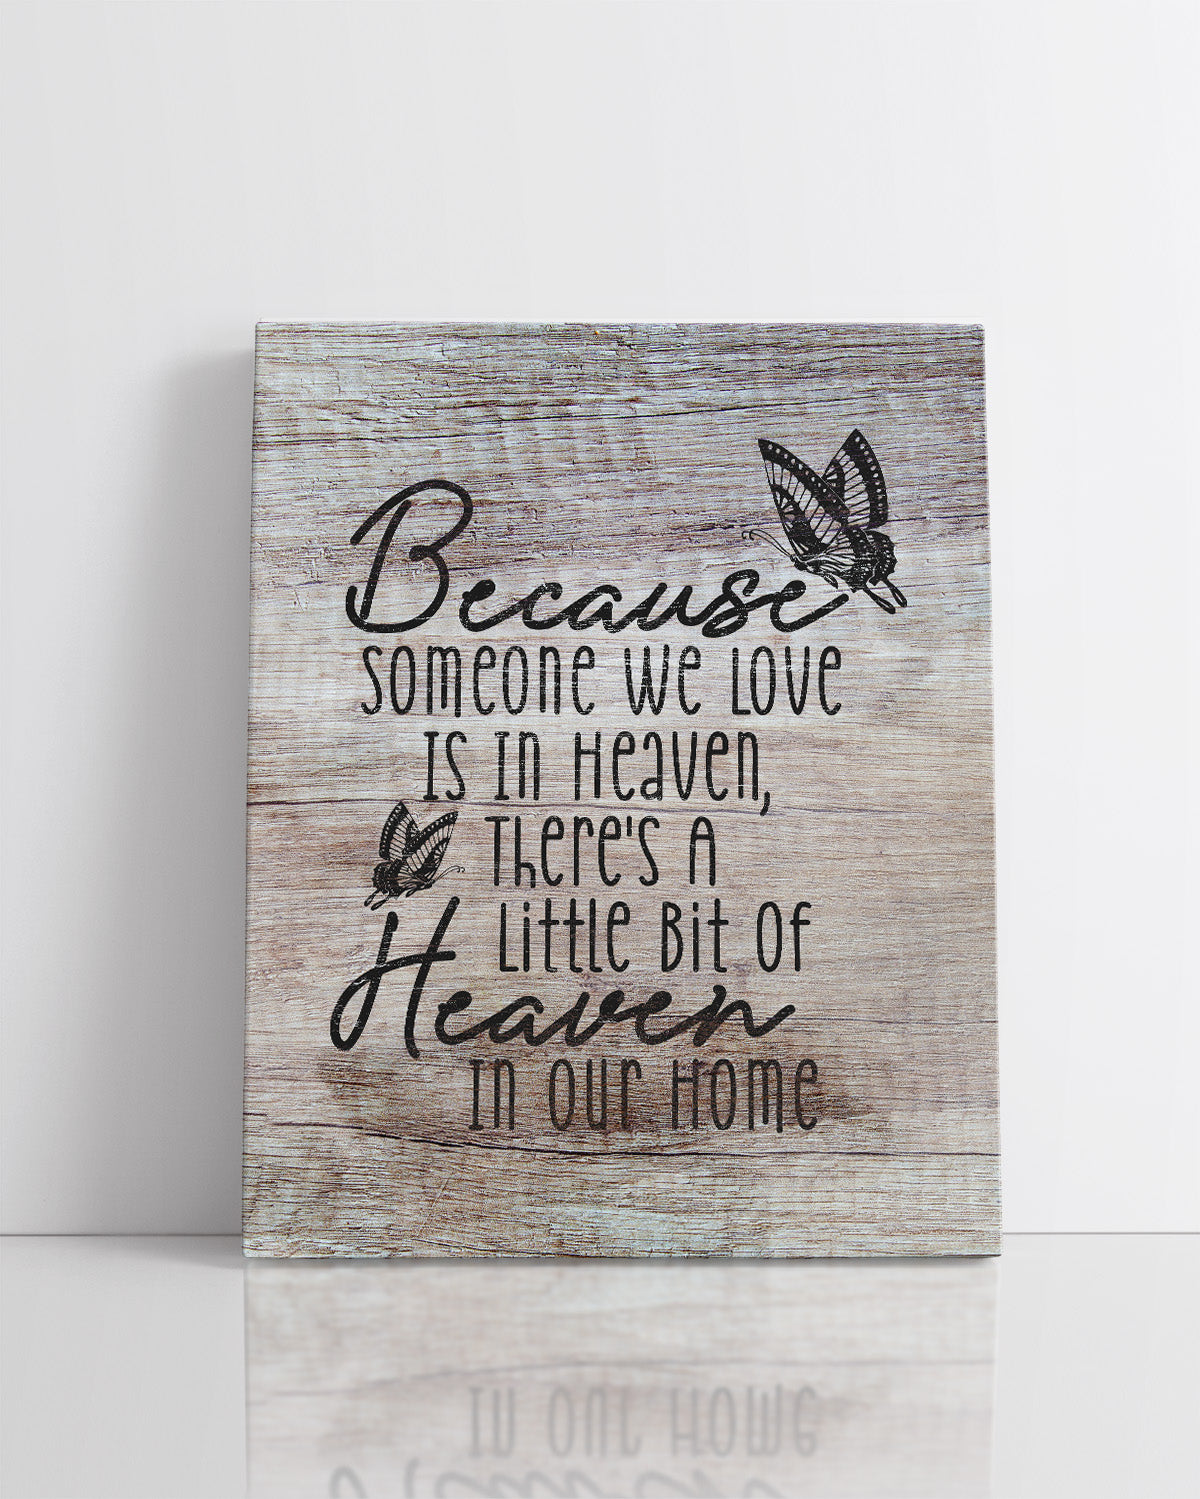 Because Someone We Love Is In Heaven - Wall Decor Art - thoughtful gift for grieving family or friends